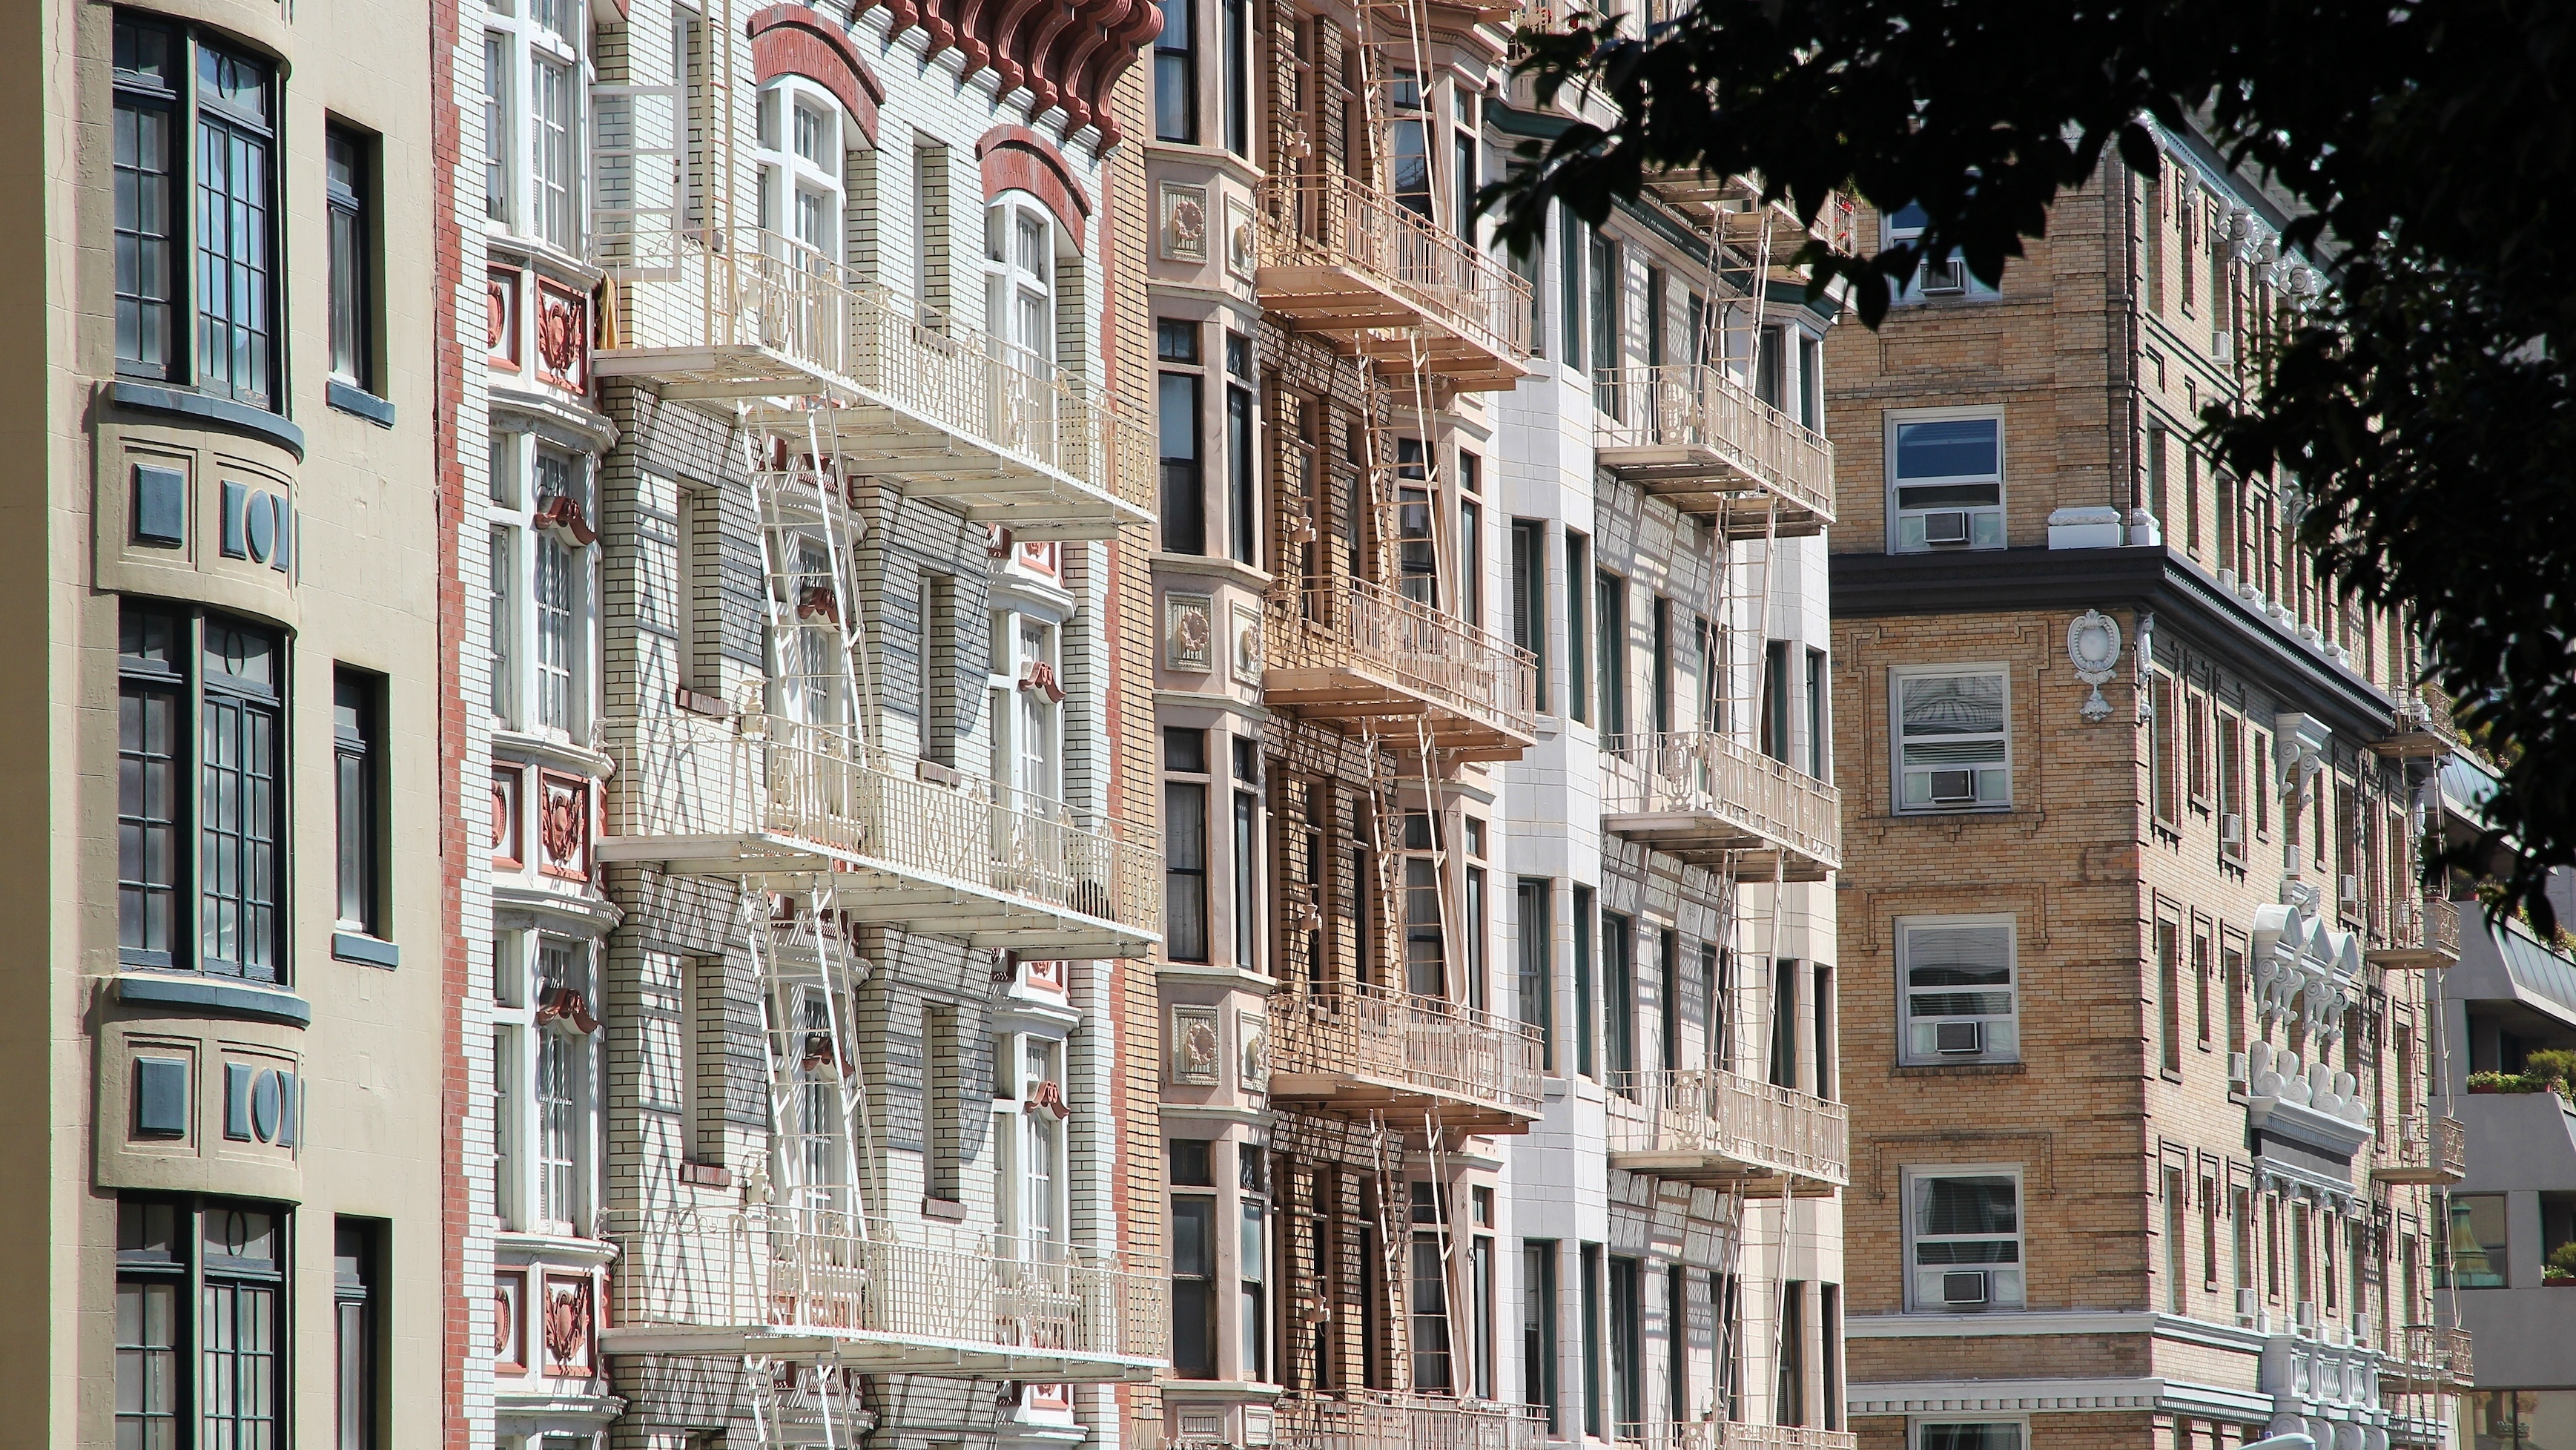 Tight view of apartment buildings in the Nob Hill neighborhood.